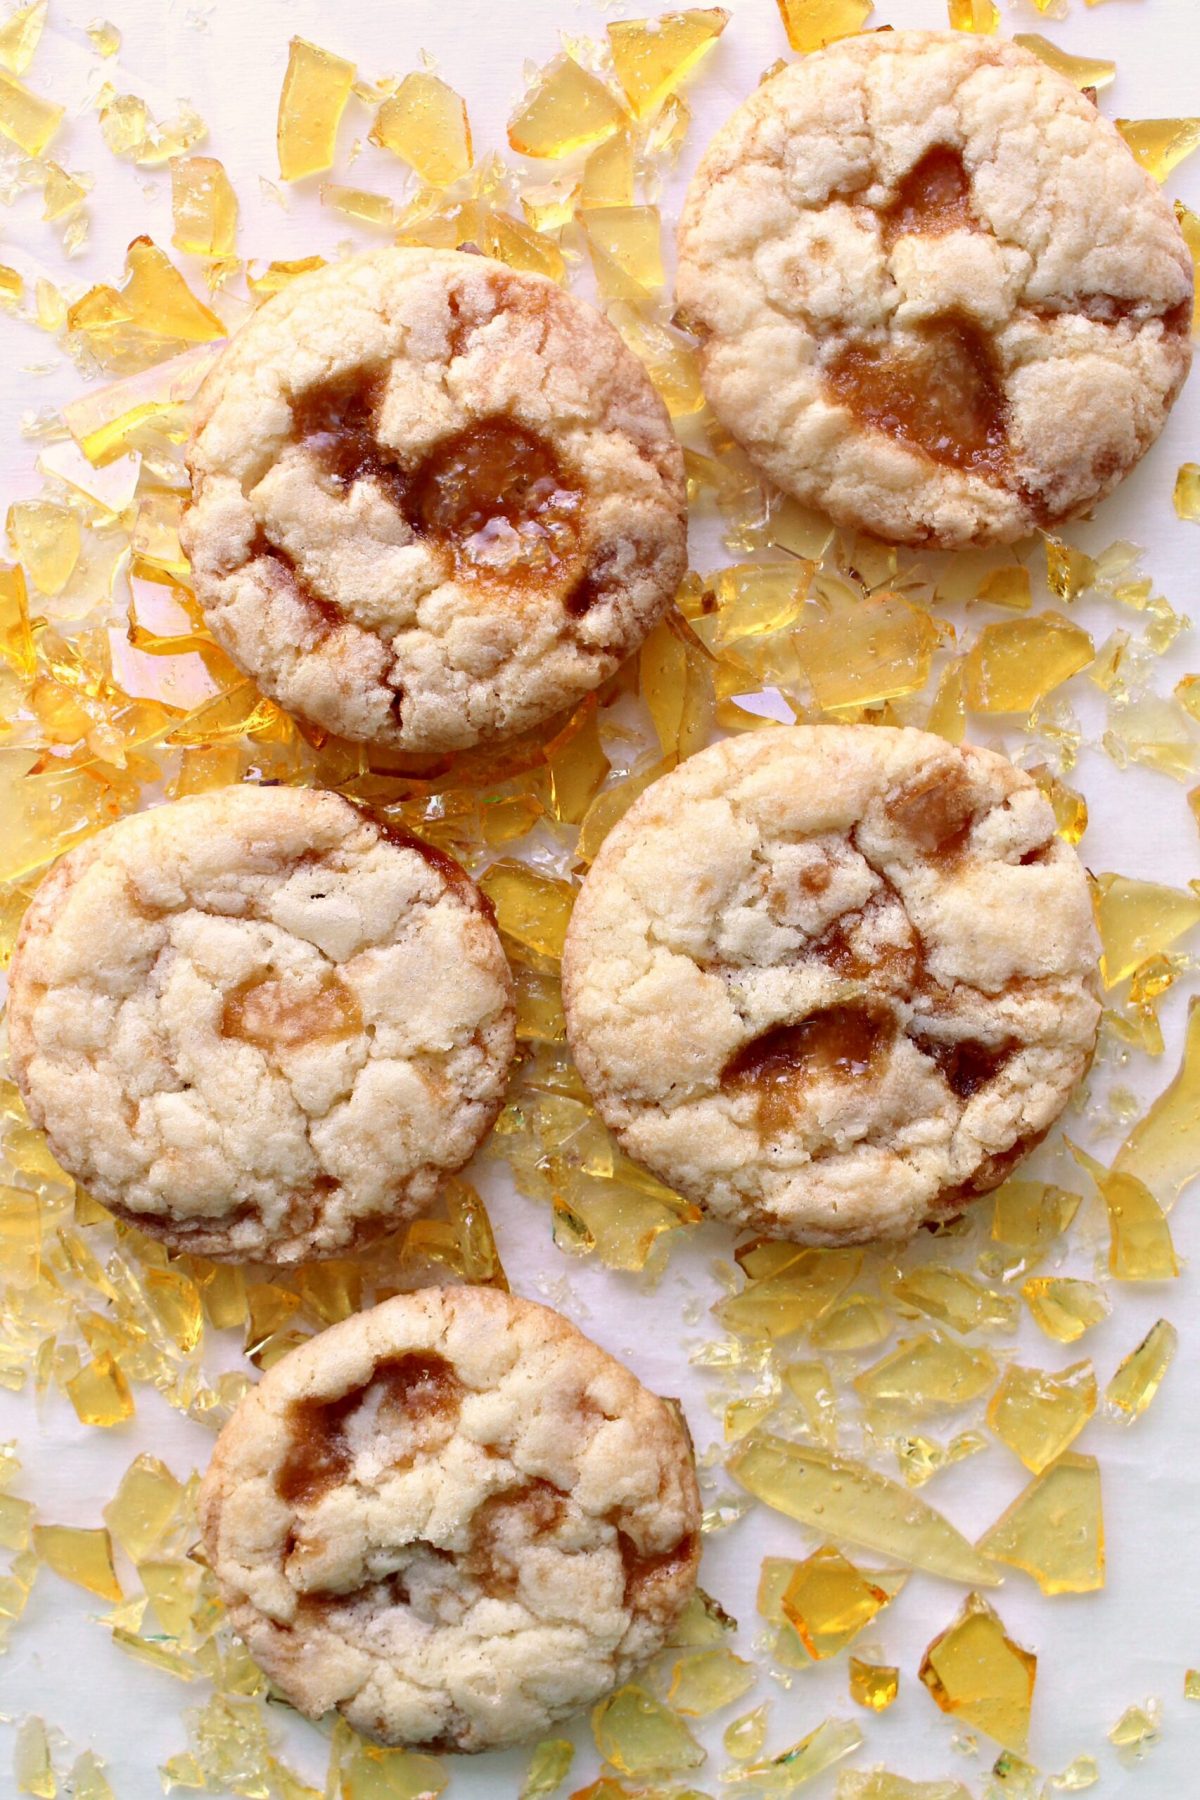 Butter cookies, with pools of melted caramel on top, lying on shards of caramel candy.